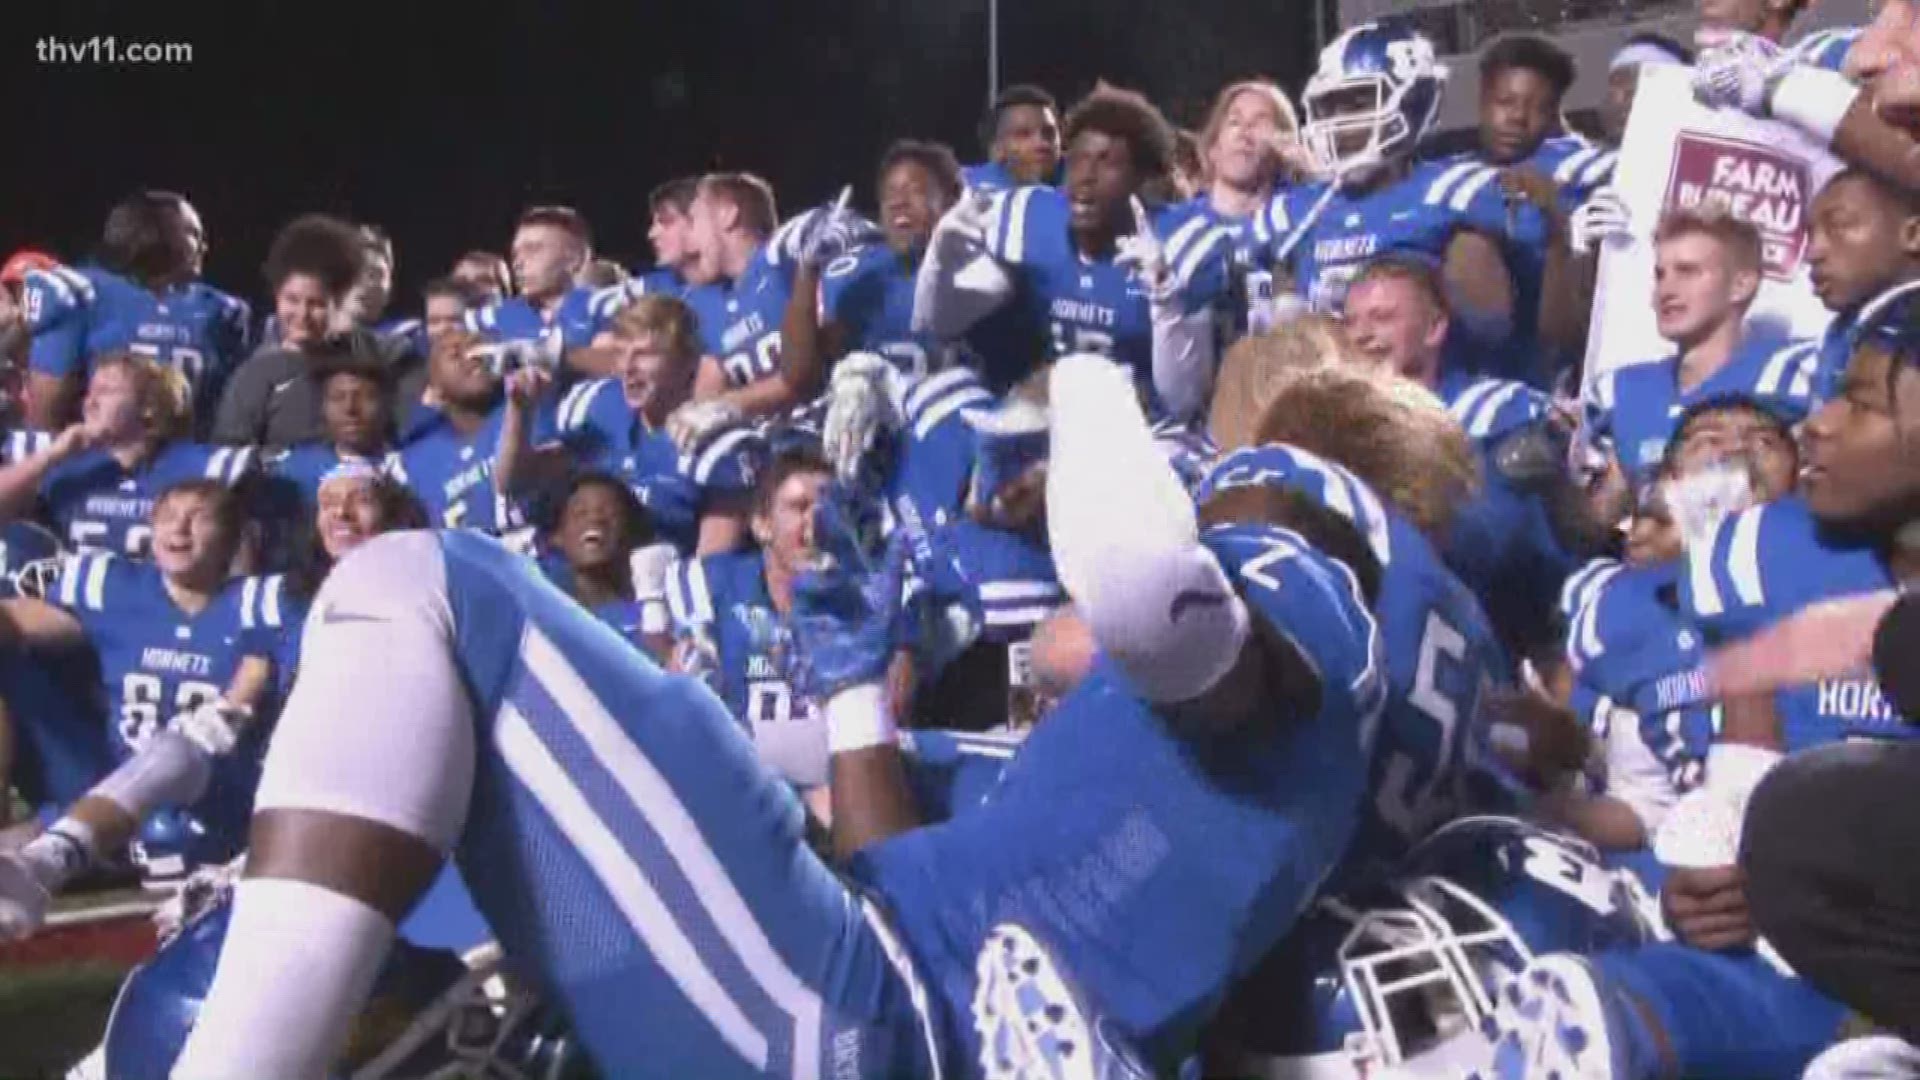 The Hornets complete a perfect 13-0 season capped off with another 7A state championship